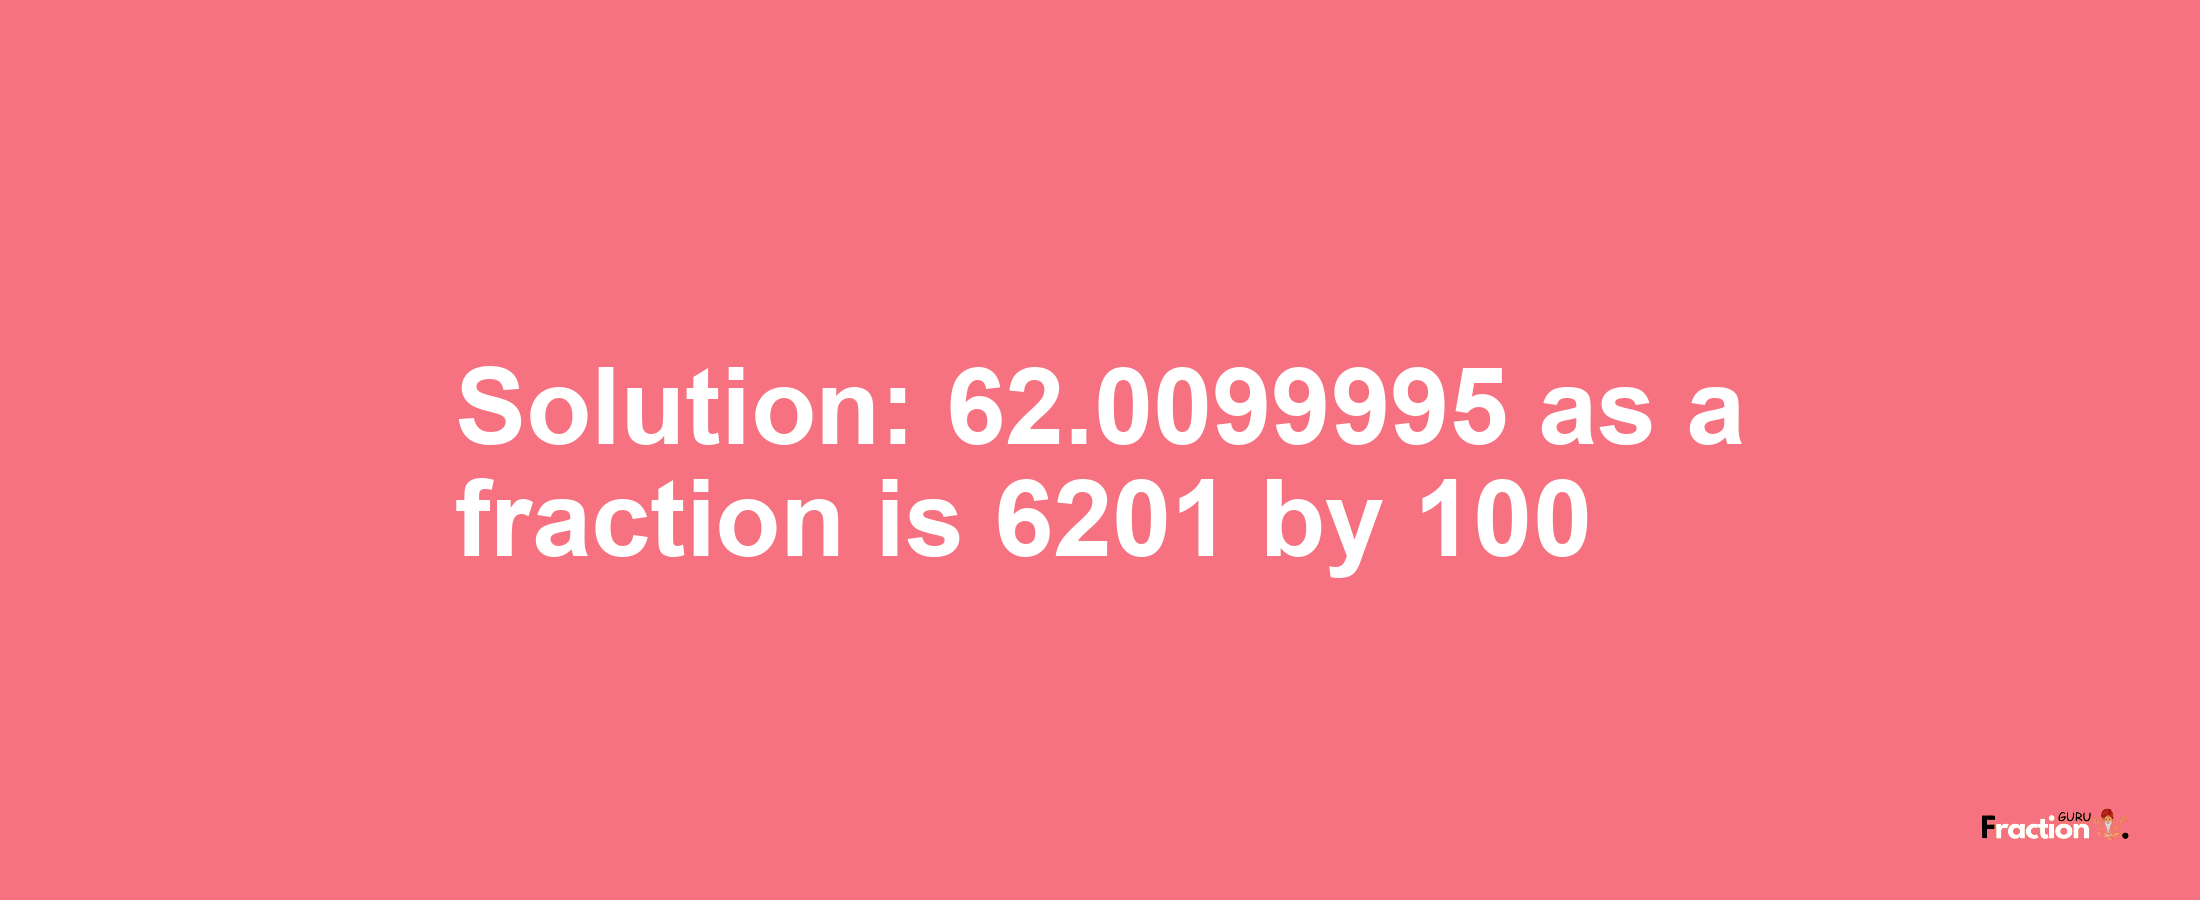 Solution:62.0099995 as a fraction is 6201/100